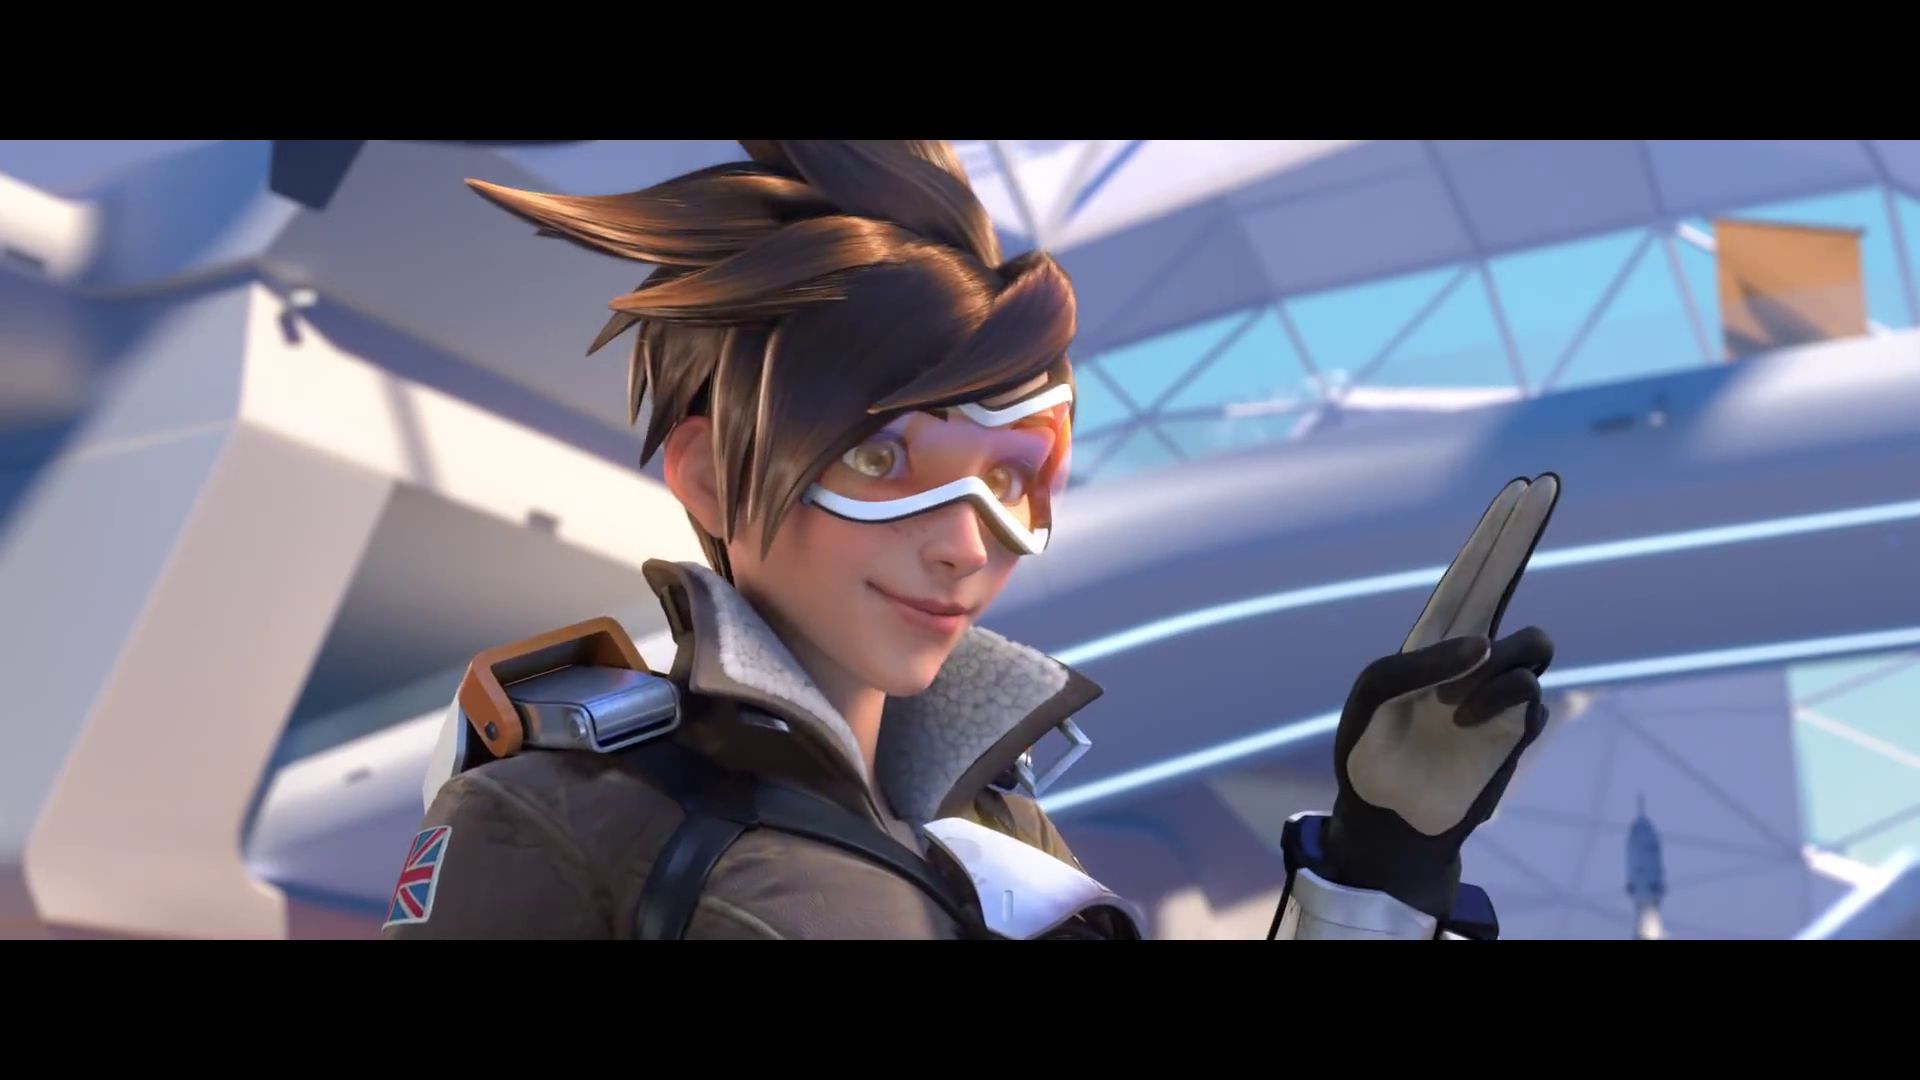 Tracer - Overwatch wallpaper - Game wallpapers - #52201